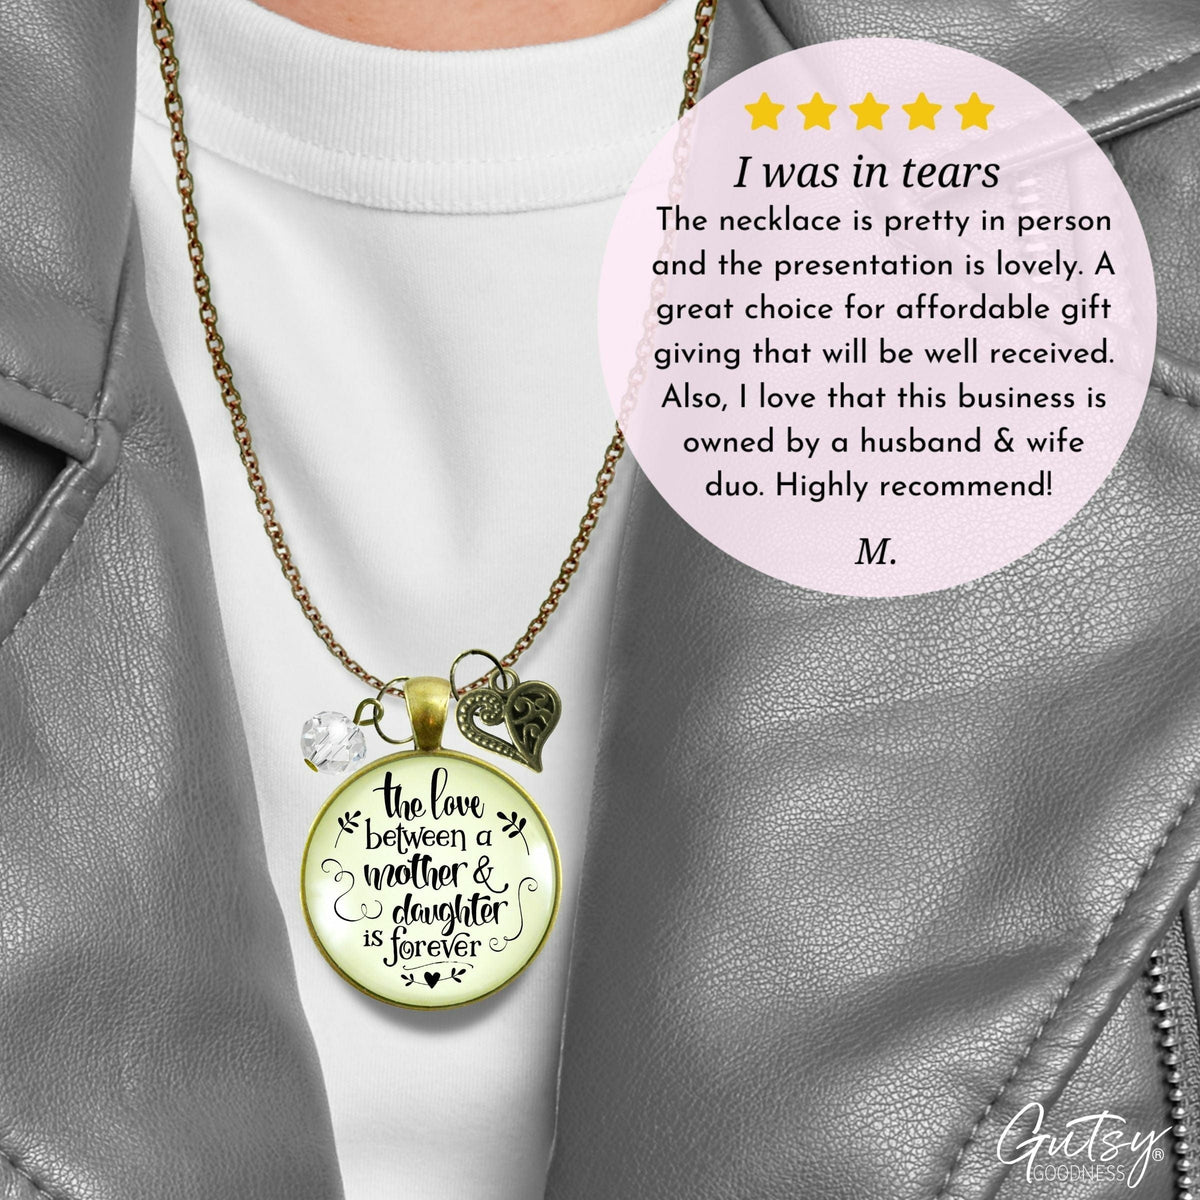 Gutsy Goodness Love Between Mother Daughter Necklace Meaningful Womens Jewelry Gift - Gutsy Goodness Handmade Jewelry;Love Between Mother Daughter Necklace Meaningful Womens Jewelry Gift - Gutsy Goodness Handmade Jewelry Gifts